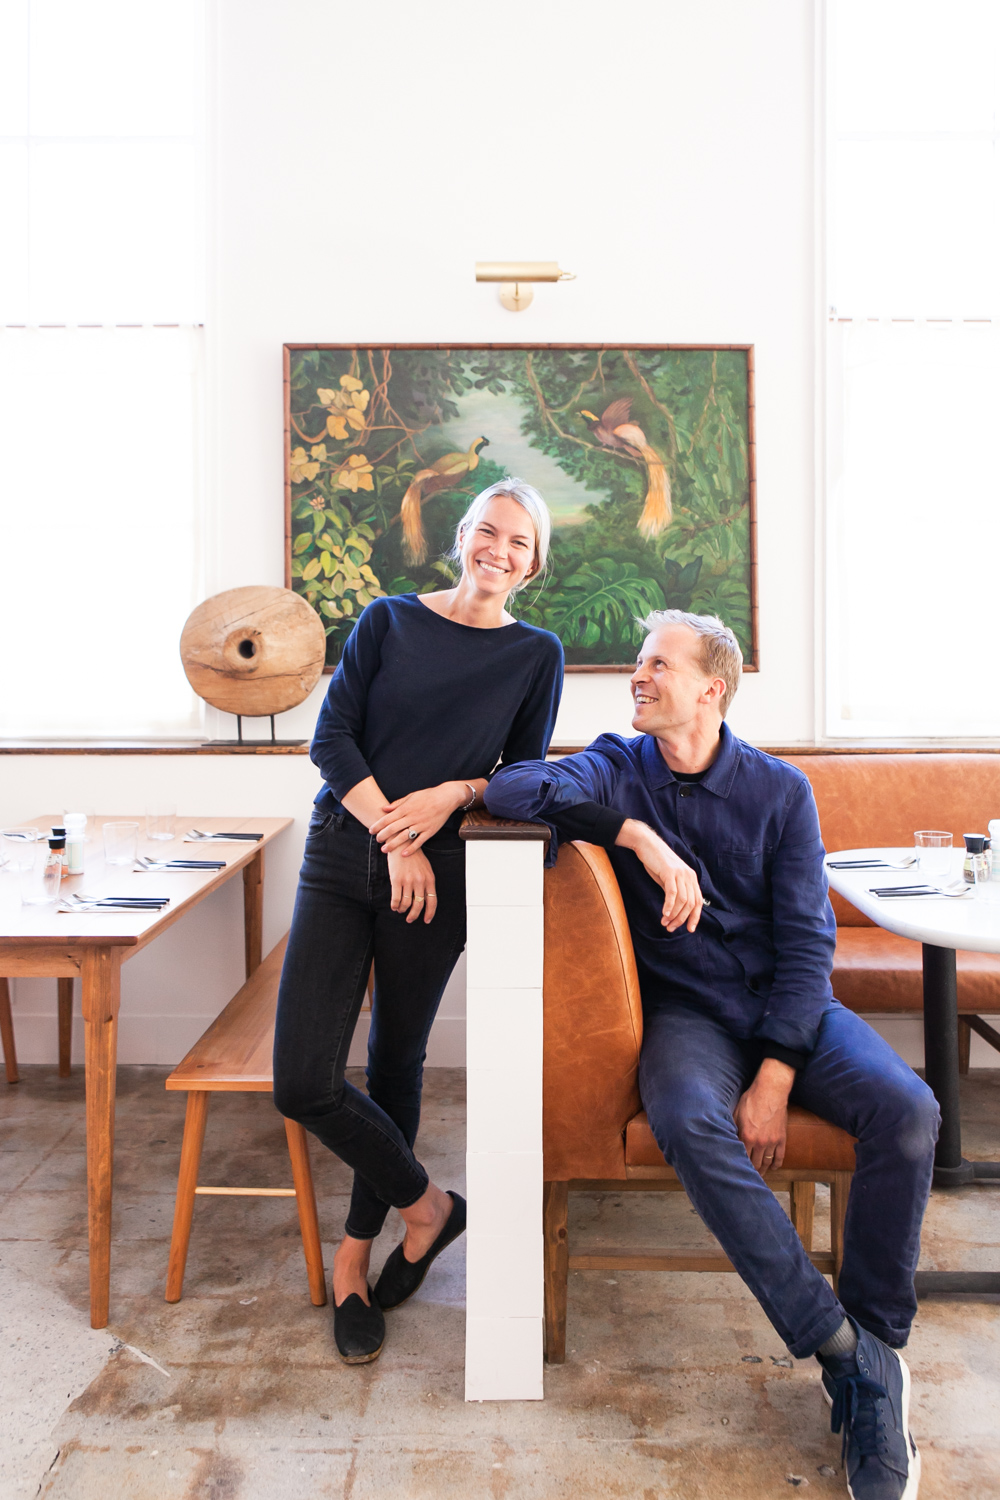   Ben and Kate Towill of Basic Kitchen and Basic Projects  